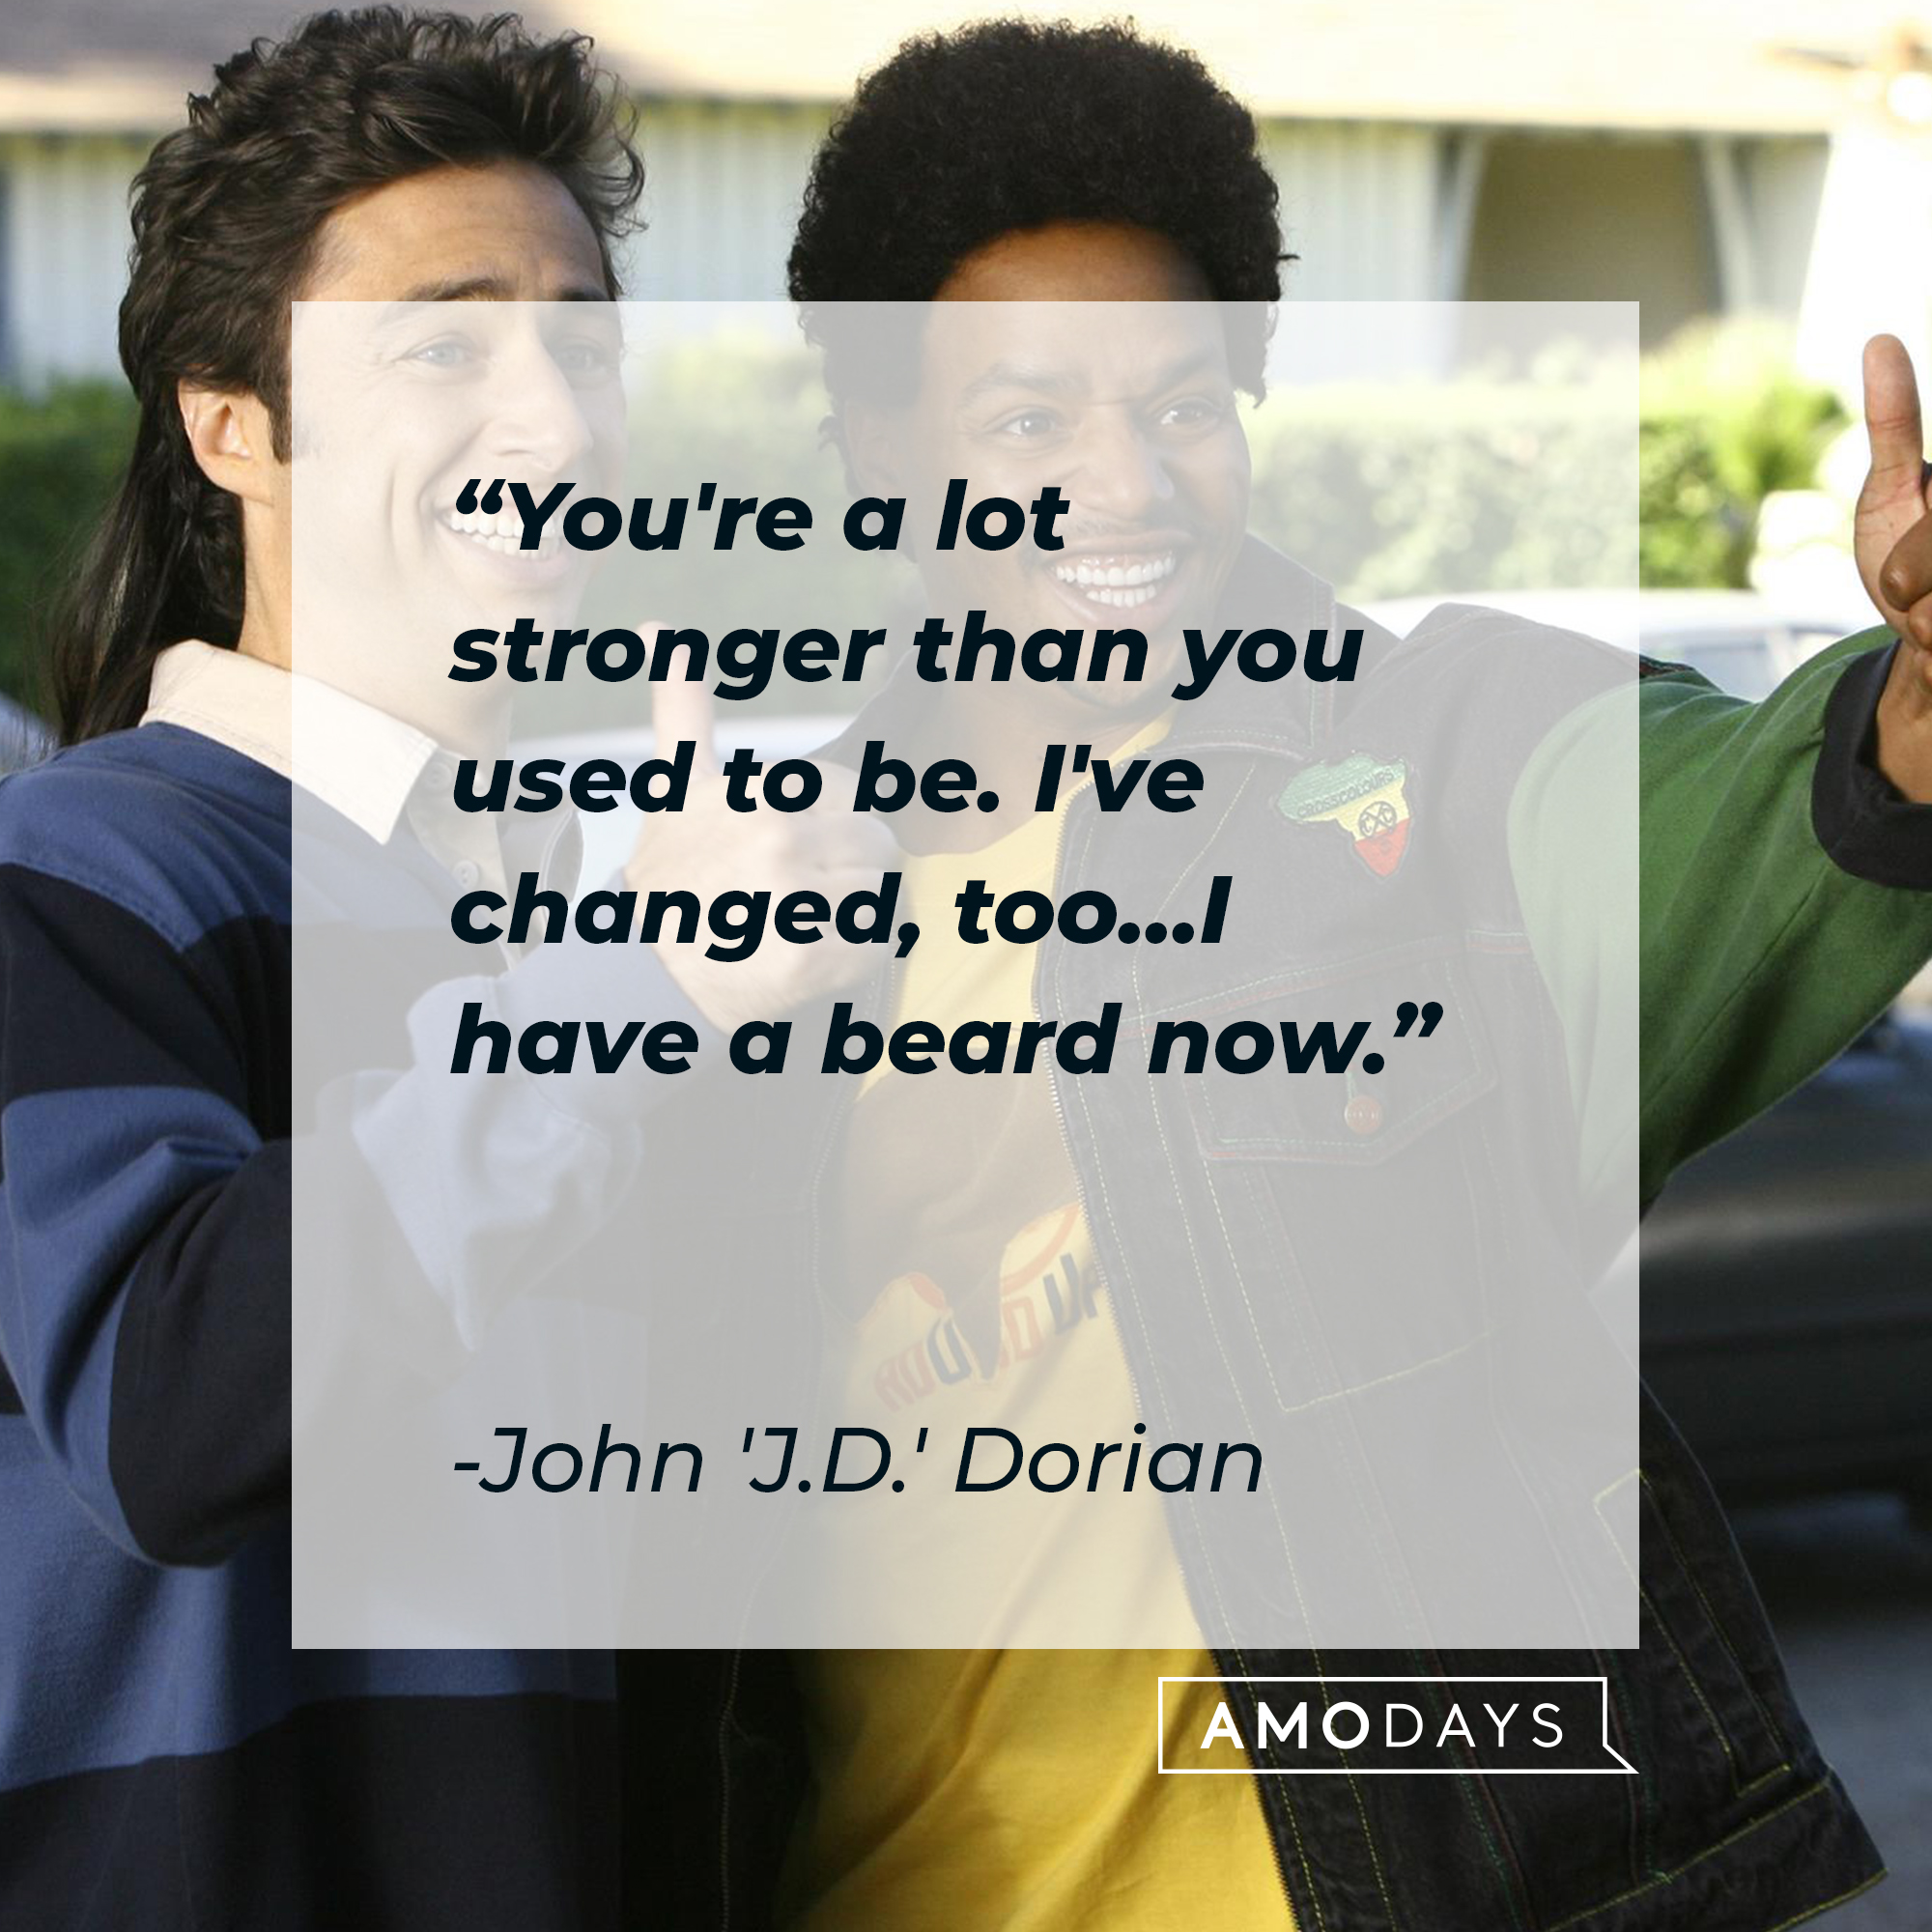 John 'J.D.' Dorian with another character and his quote: You're a lot stronger than you used to be. I've changed, too... I have a beard now.” | Source: Facebook.com/scrubs